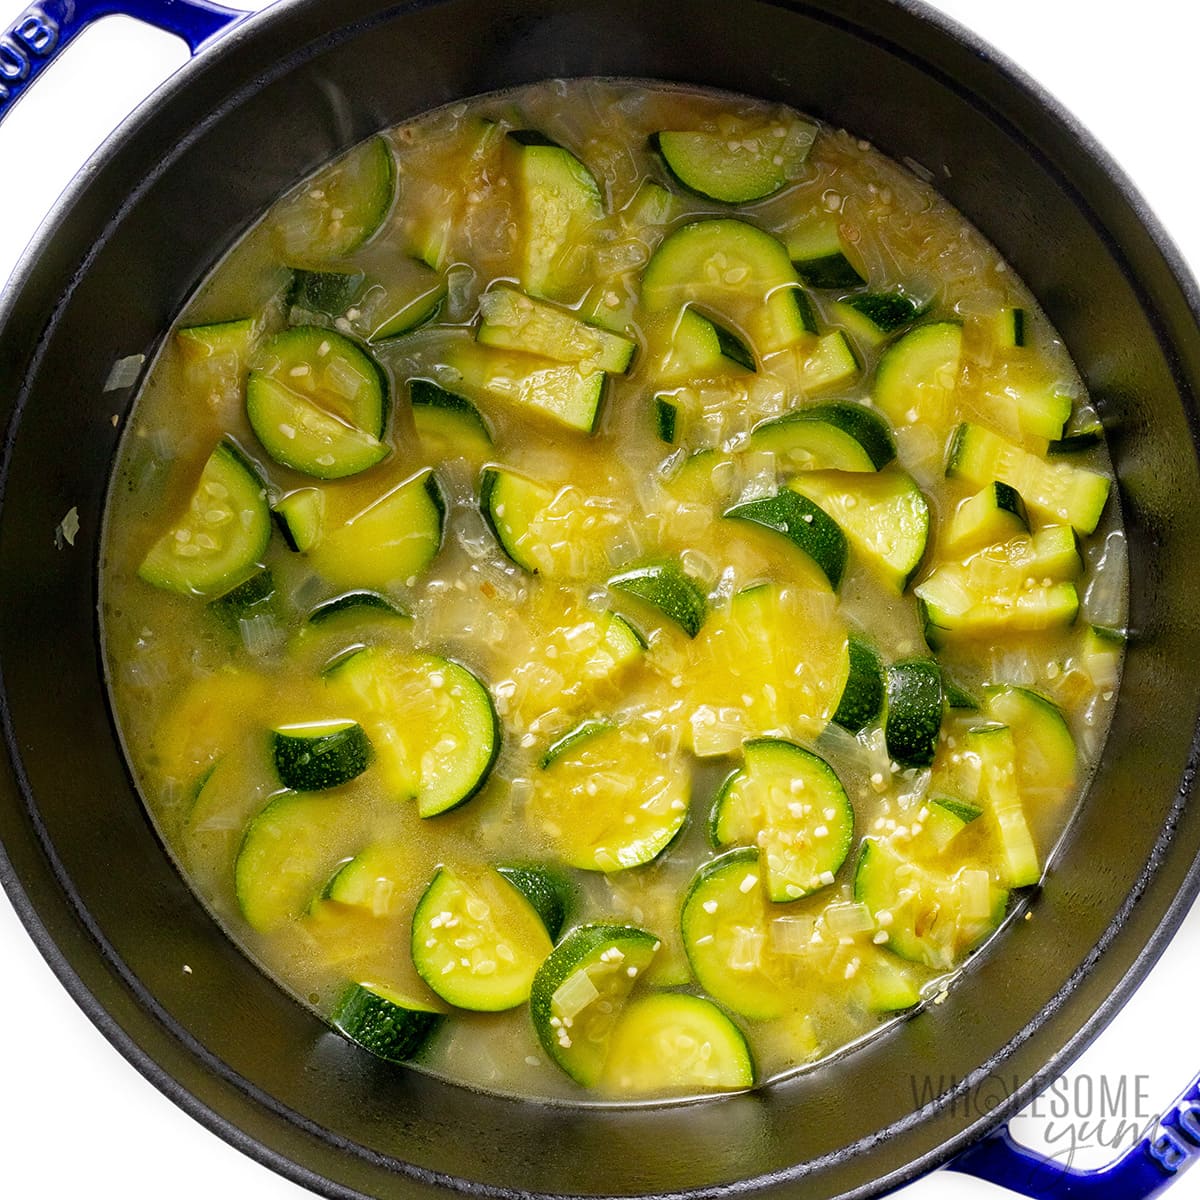 Zucchini soup after simmering.